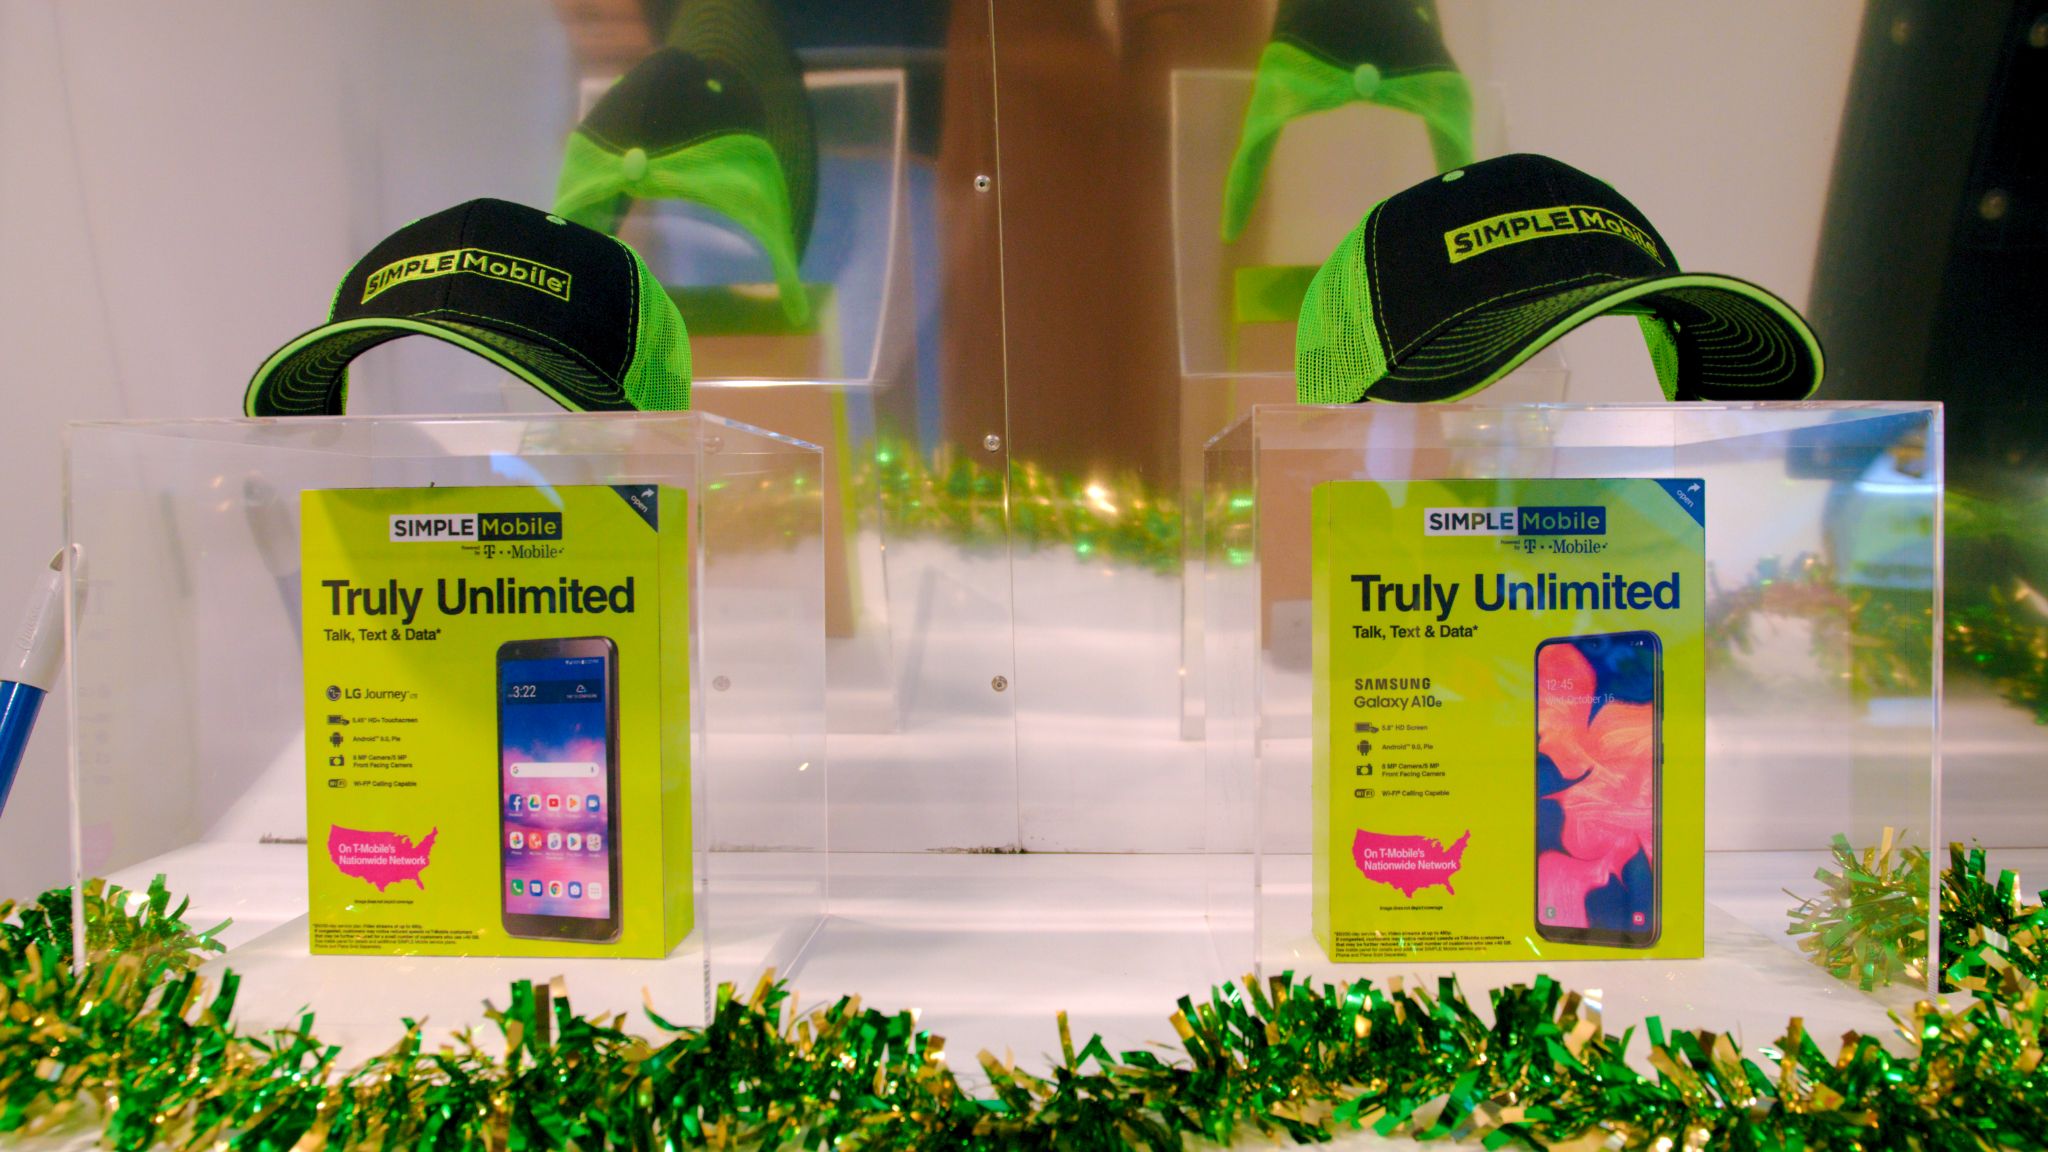 Two phone cases on display in glass with store caps with logos resting on top